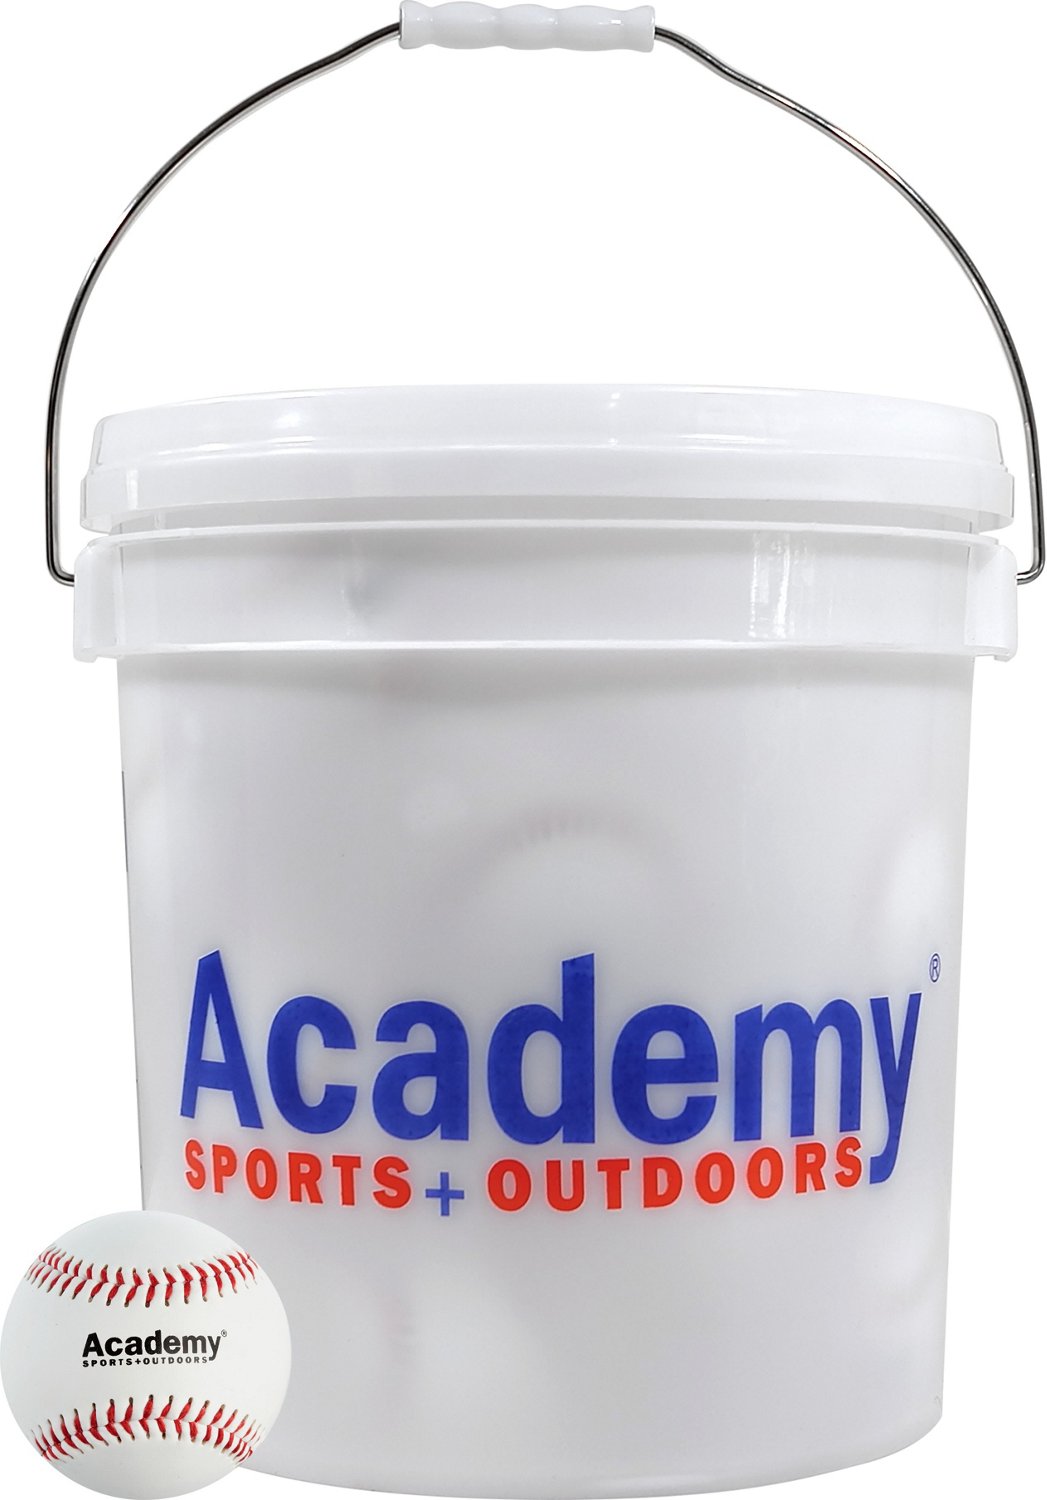 Academy Sports + Outdoors Clearance Sale: Up to 50% off on Select Styles